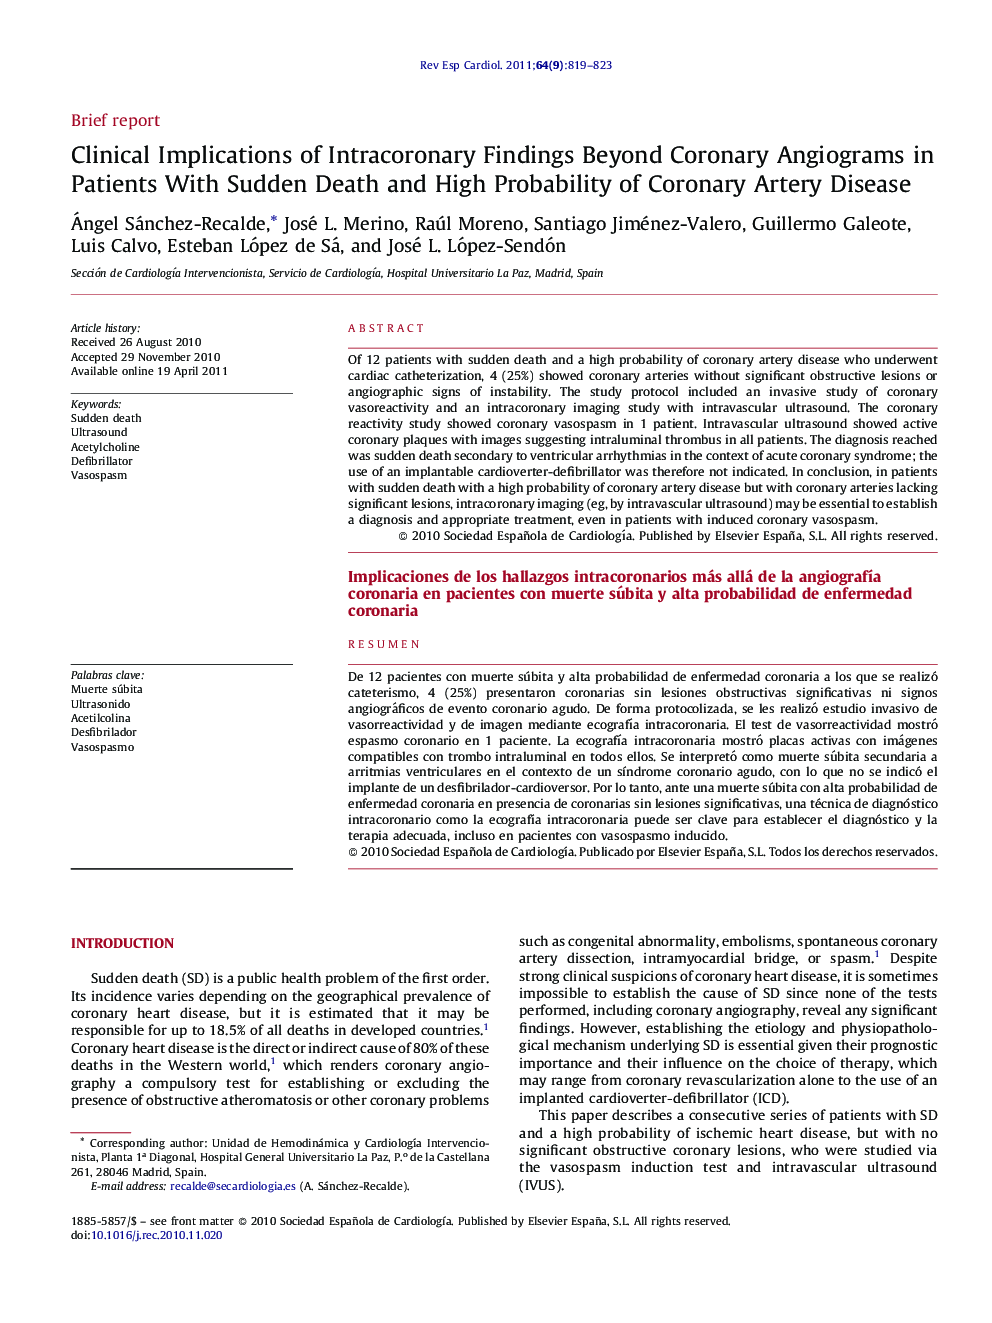 Clinical Implications of Intracoronary Findings Beyond Coronary Angiograms in Patients With Sudden Death and High Probability of Coronary Artery Disease